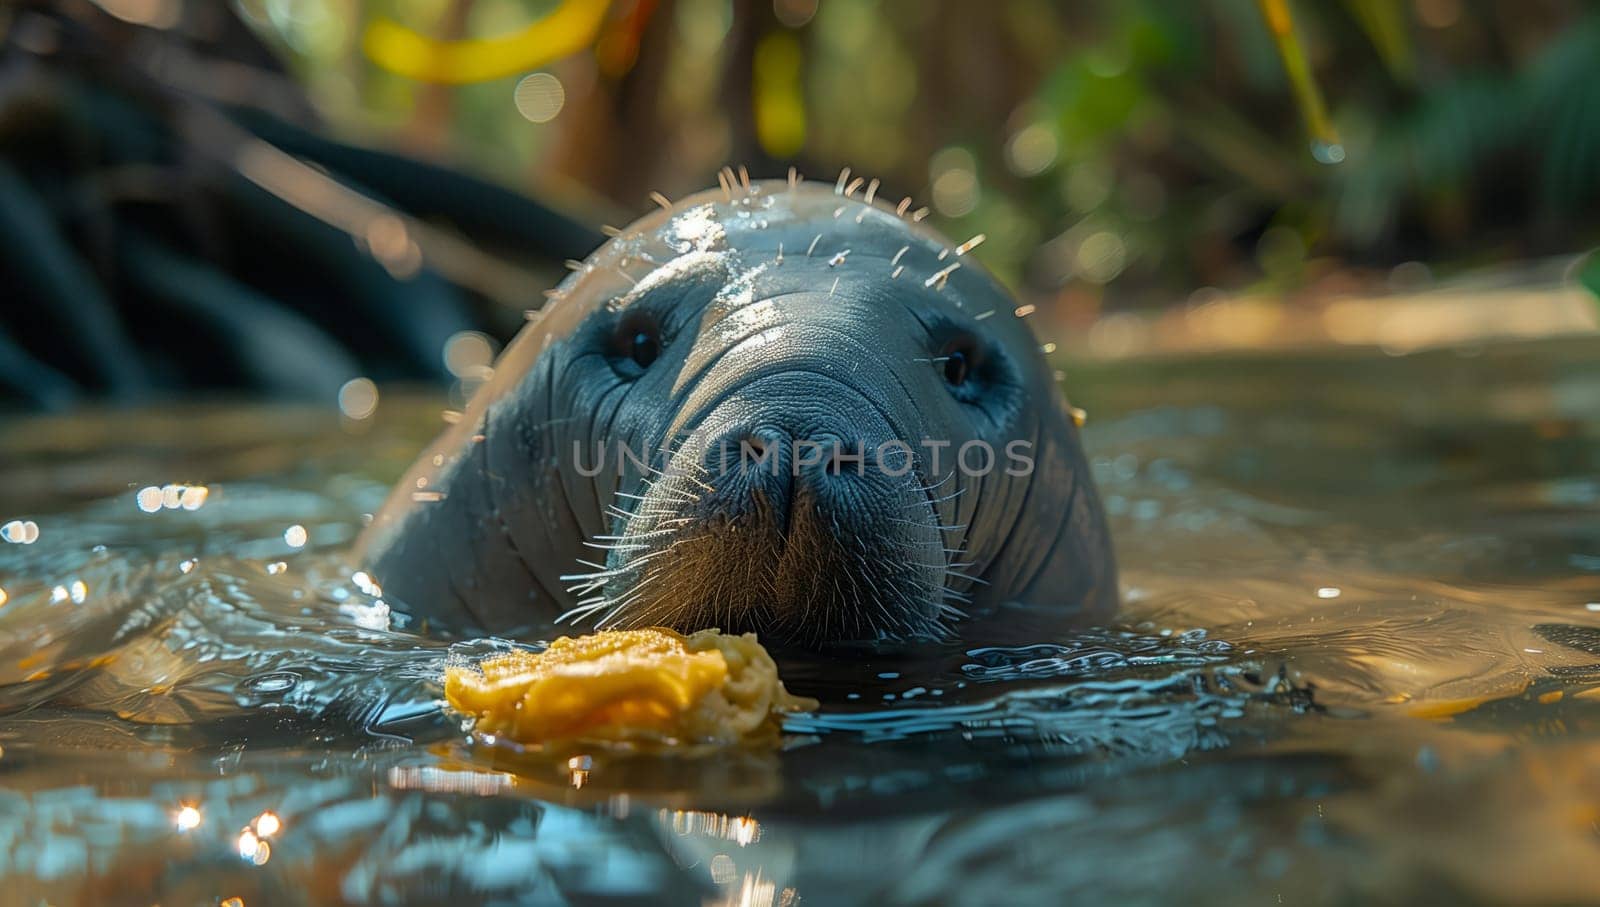 A marine mammal, the manatee, with its snout, is a herbivorous aquatic creature that is often seen peacefully eating underwater vegetation in the water